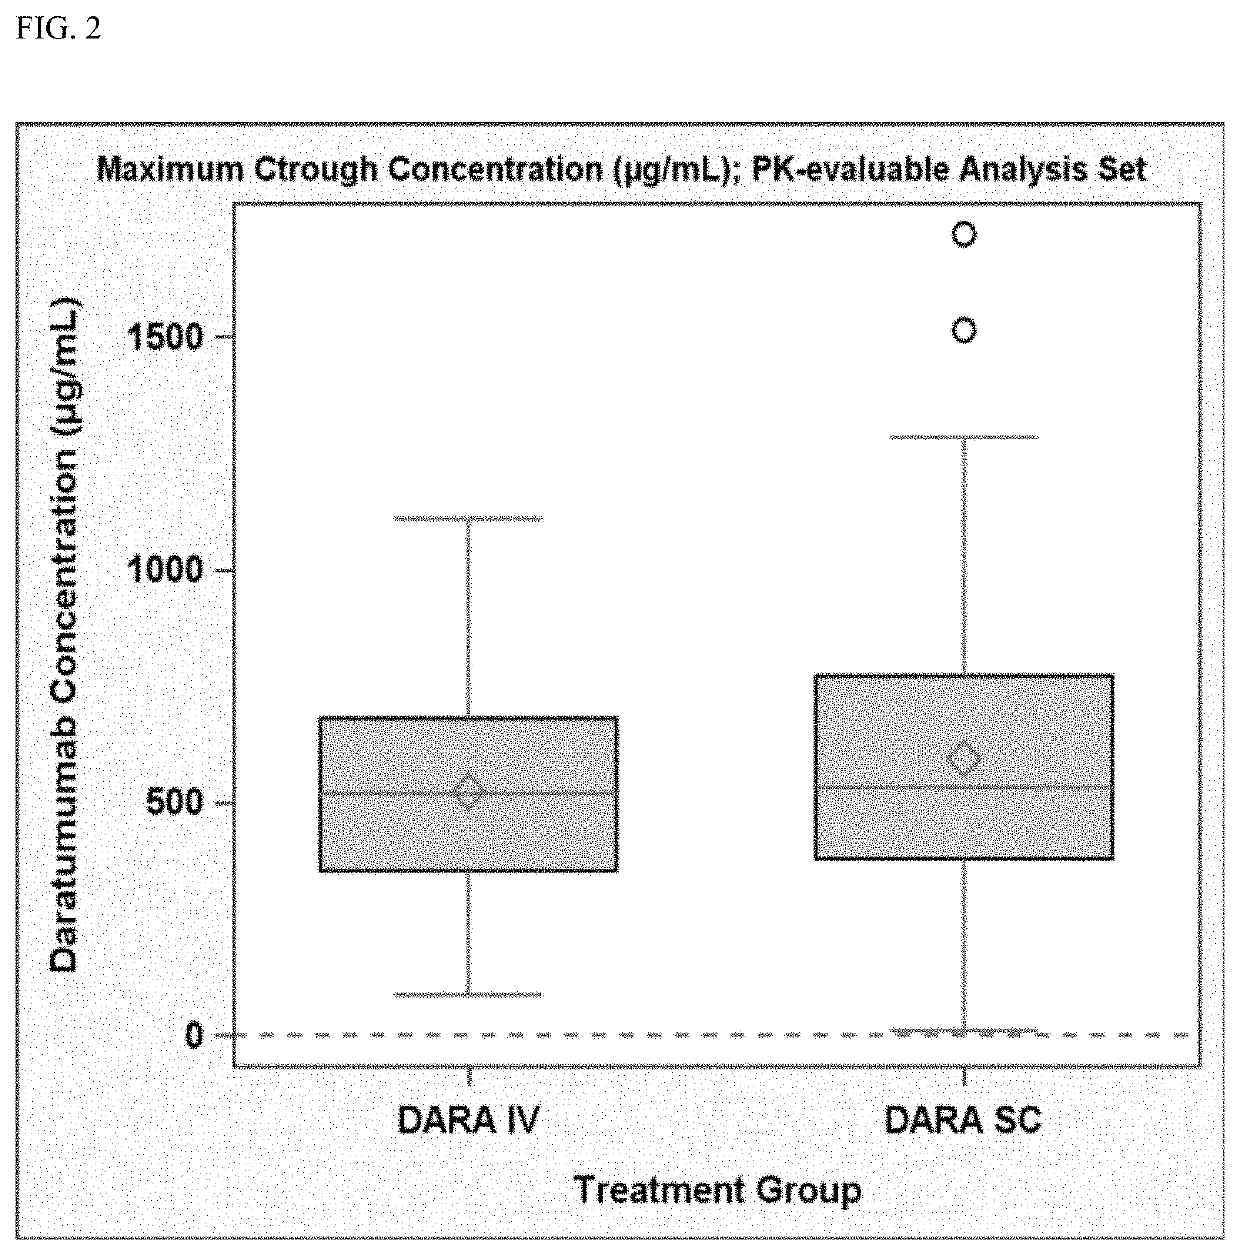 Clinically Proven Subcutaneous Pharmaceutical Compositions Comprising Anti-CD38 Antibodies and Their Uses in Combination with Pomalidomide and Dexamethasone